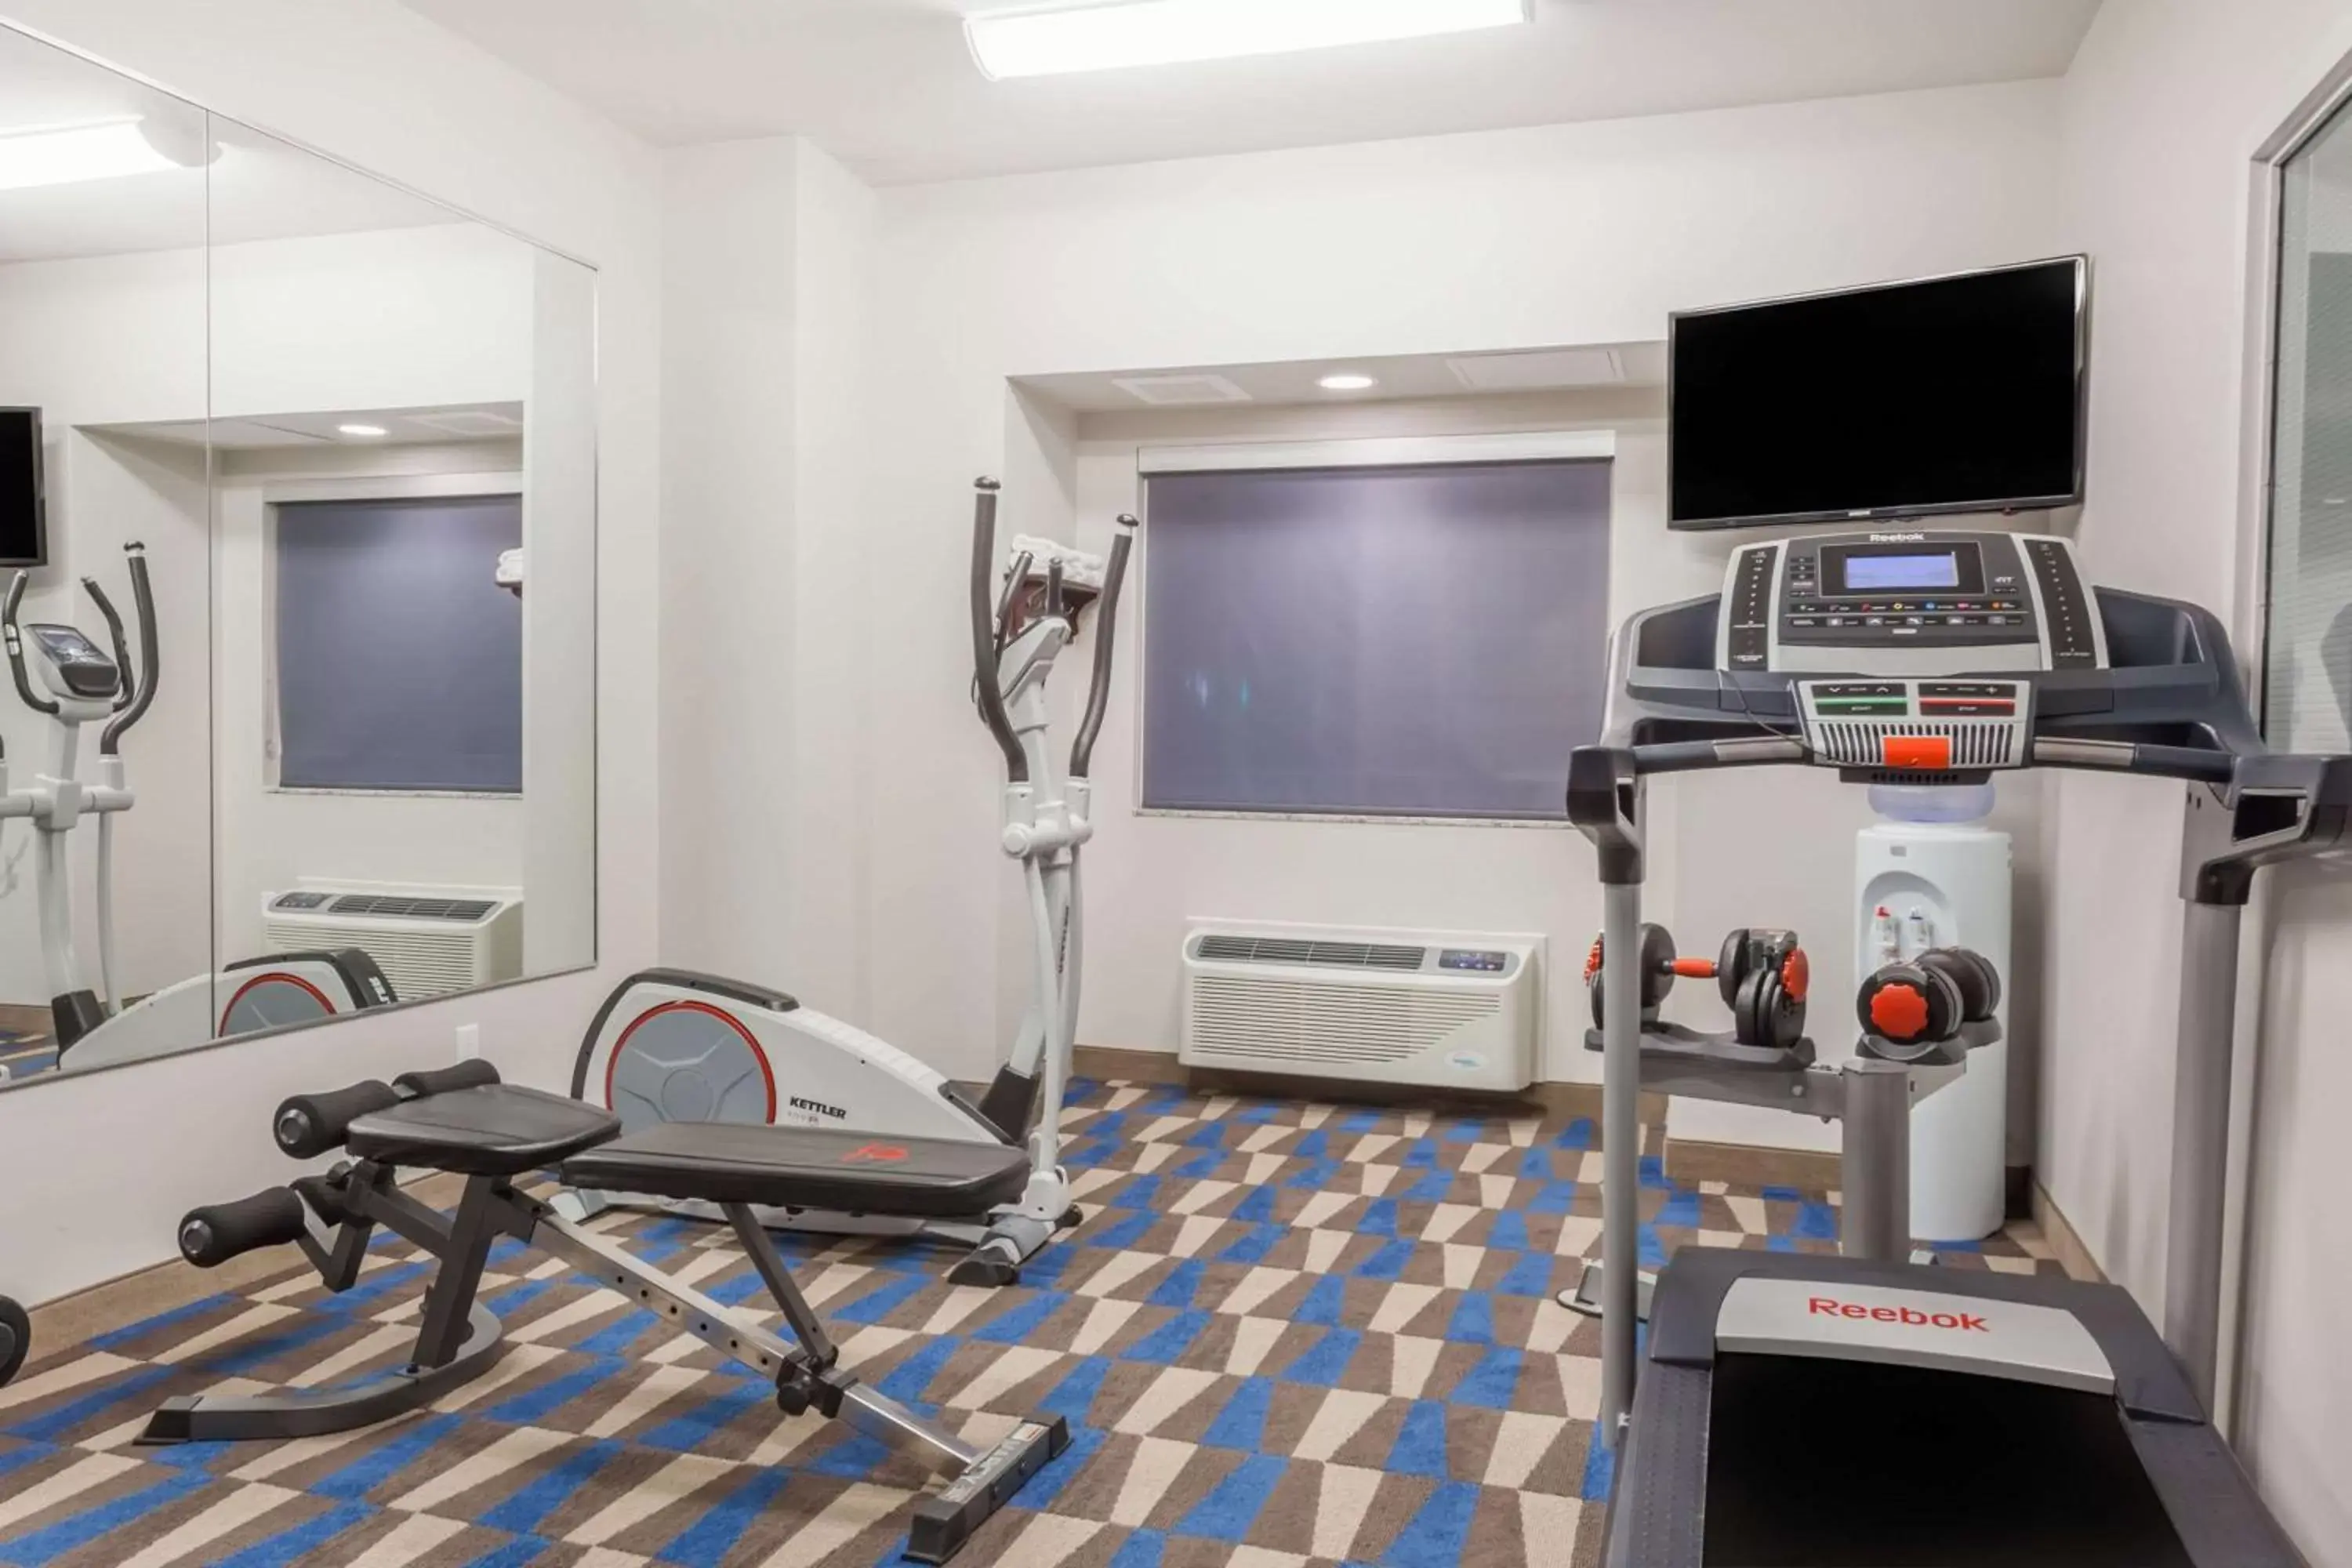 Fitness centre/facilities, Fitness Center/Facilities in Microtel Inn & Suites Sault Ste. Marie